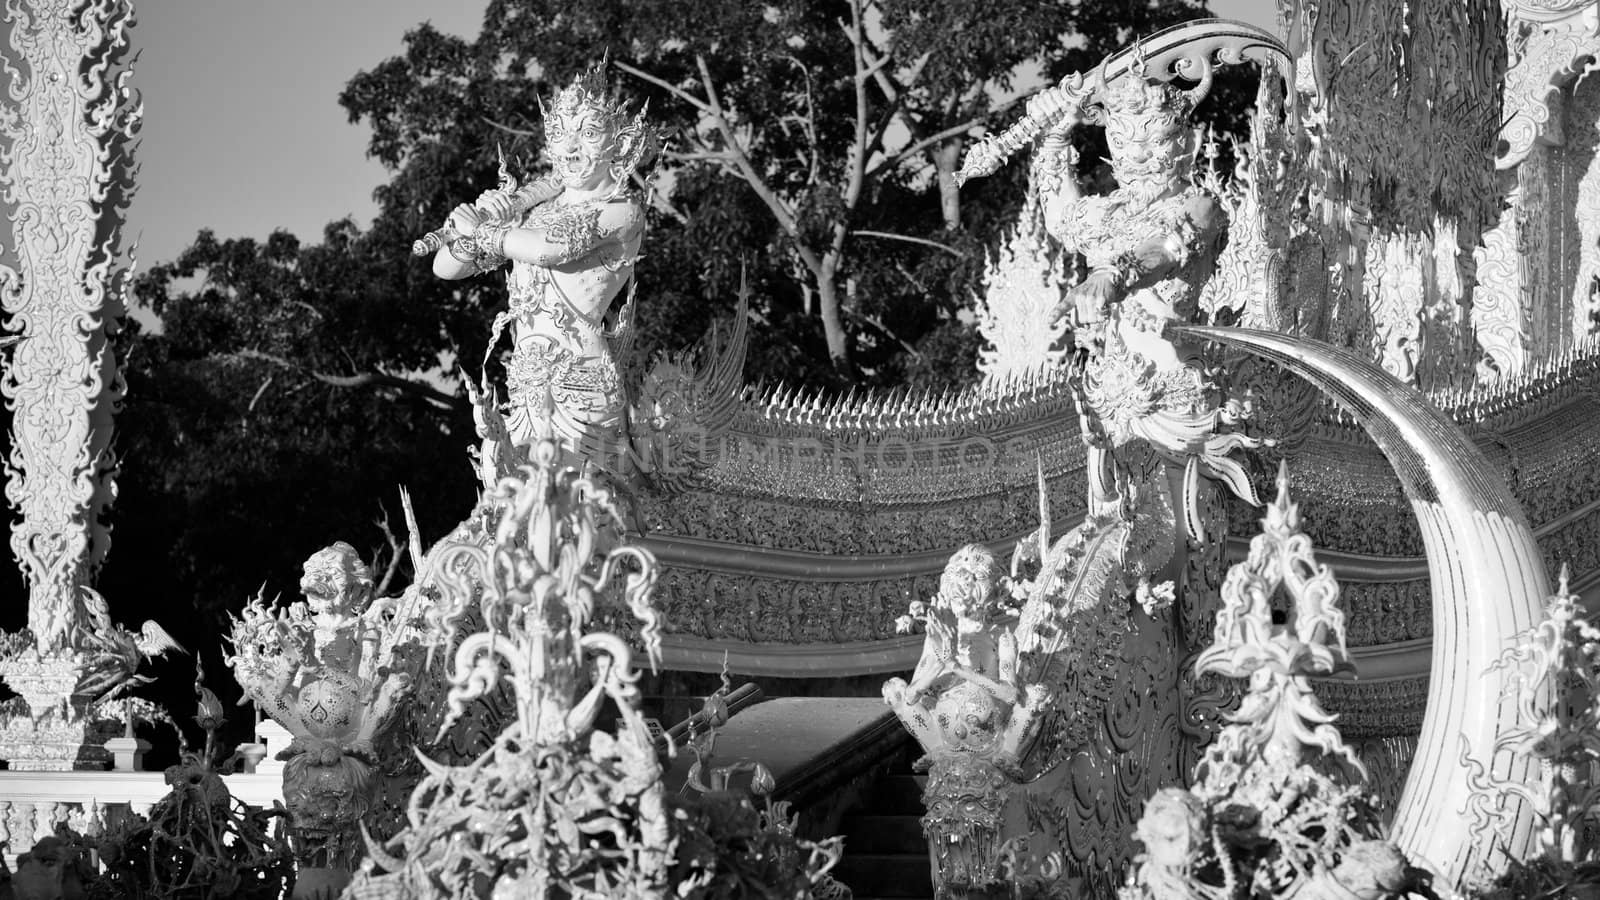 Mythological guardians in White temple by timbrk